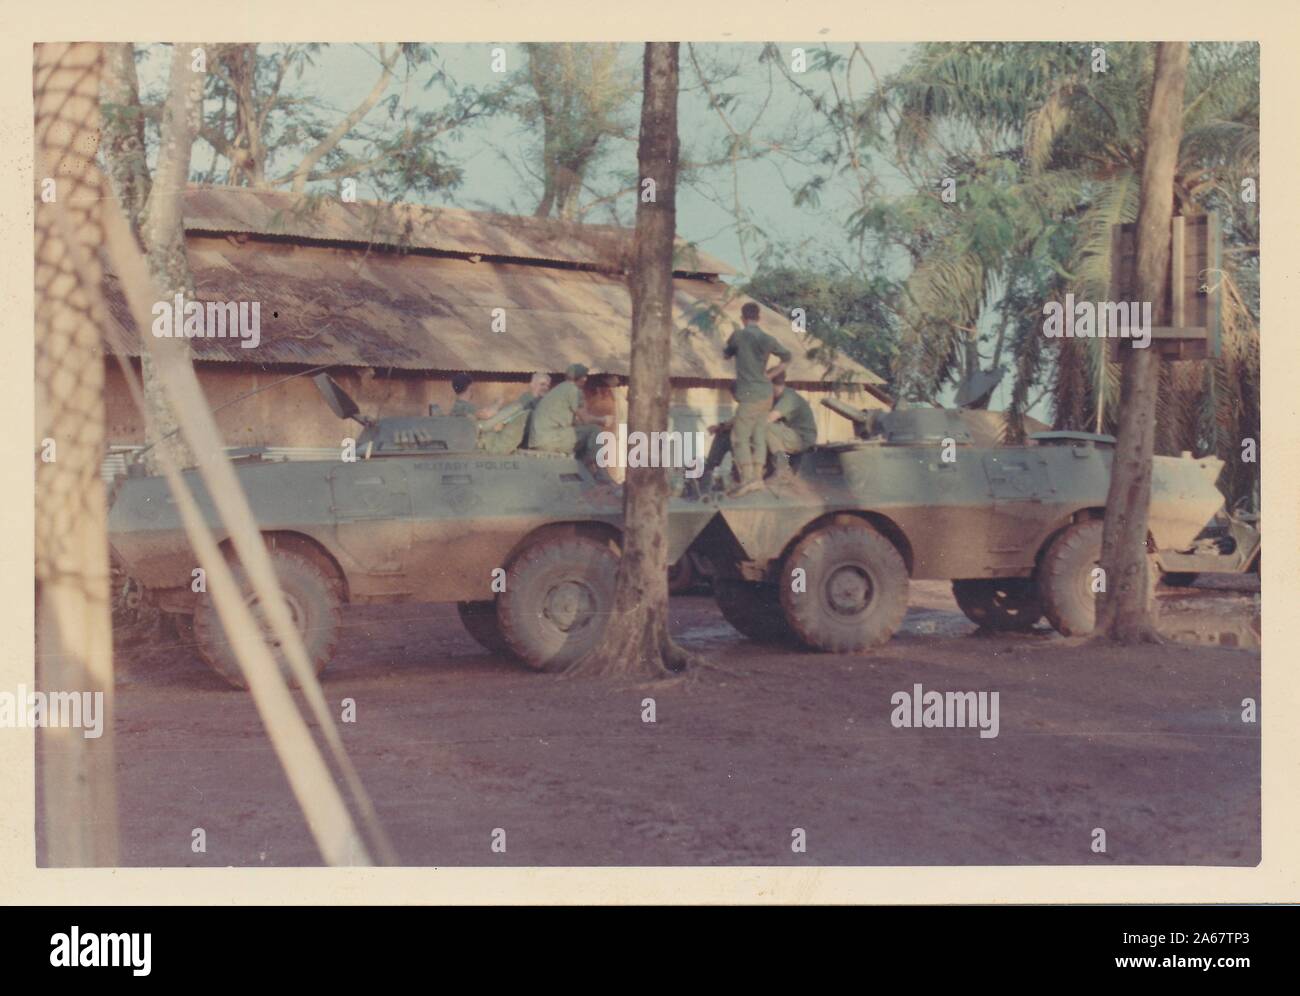 Military police with M706 military vehicles in Vietnam during the Vietnam War, 1970. () Stock Photo